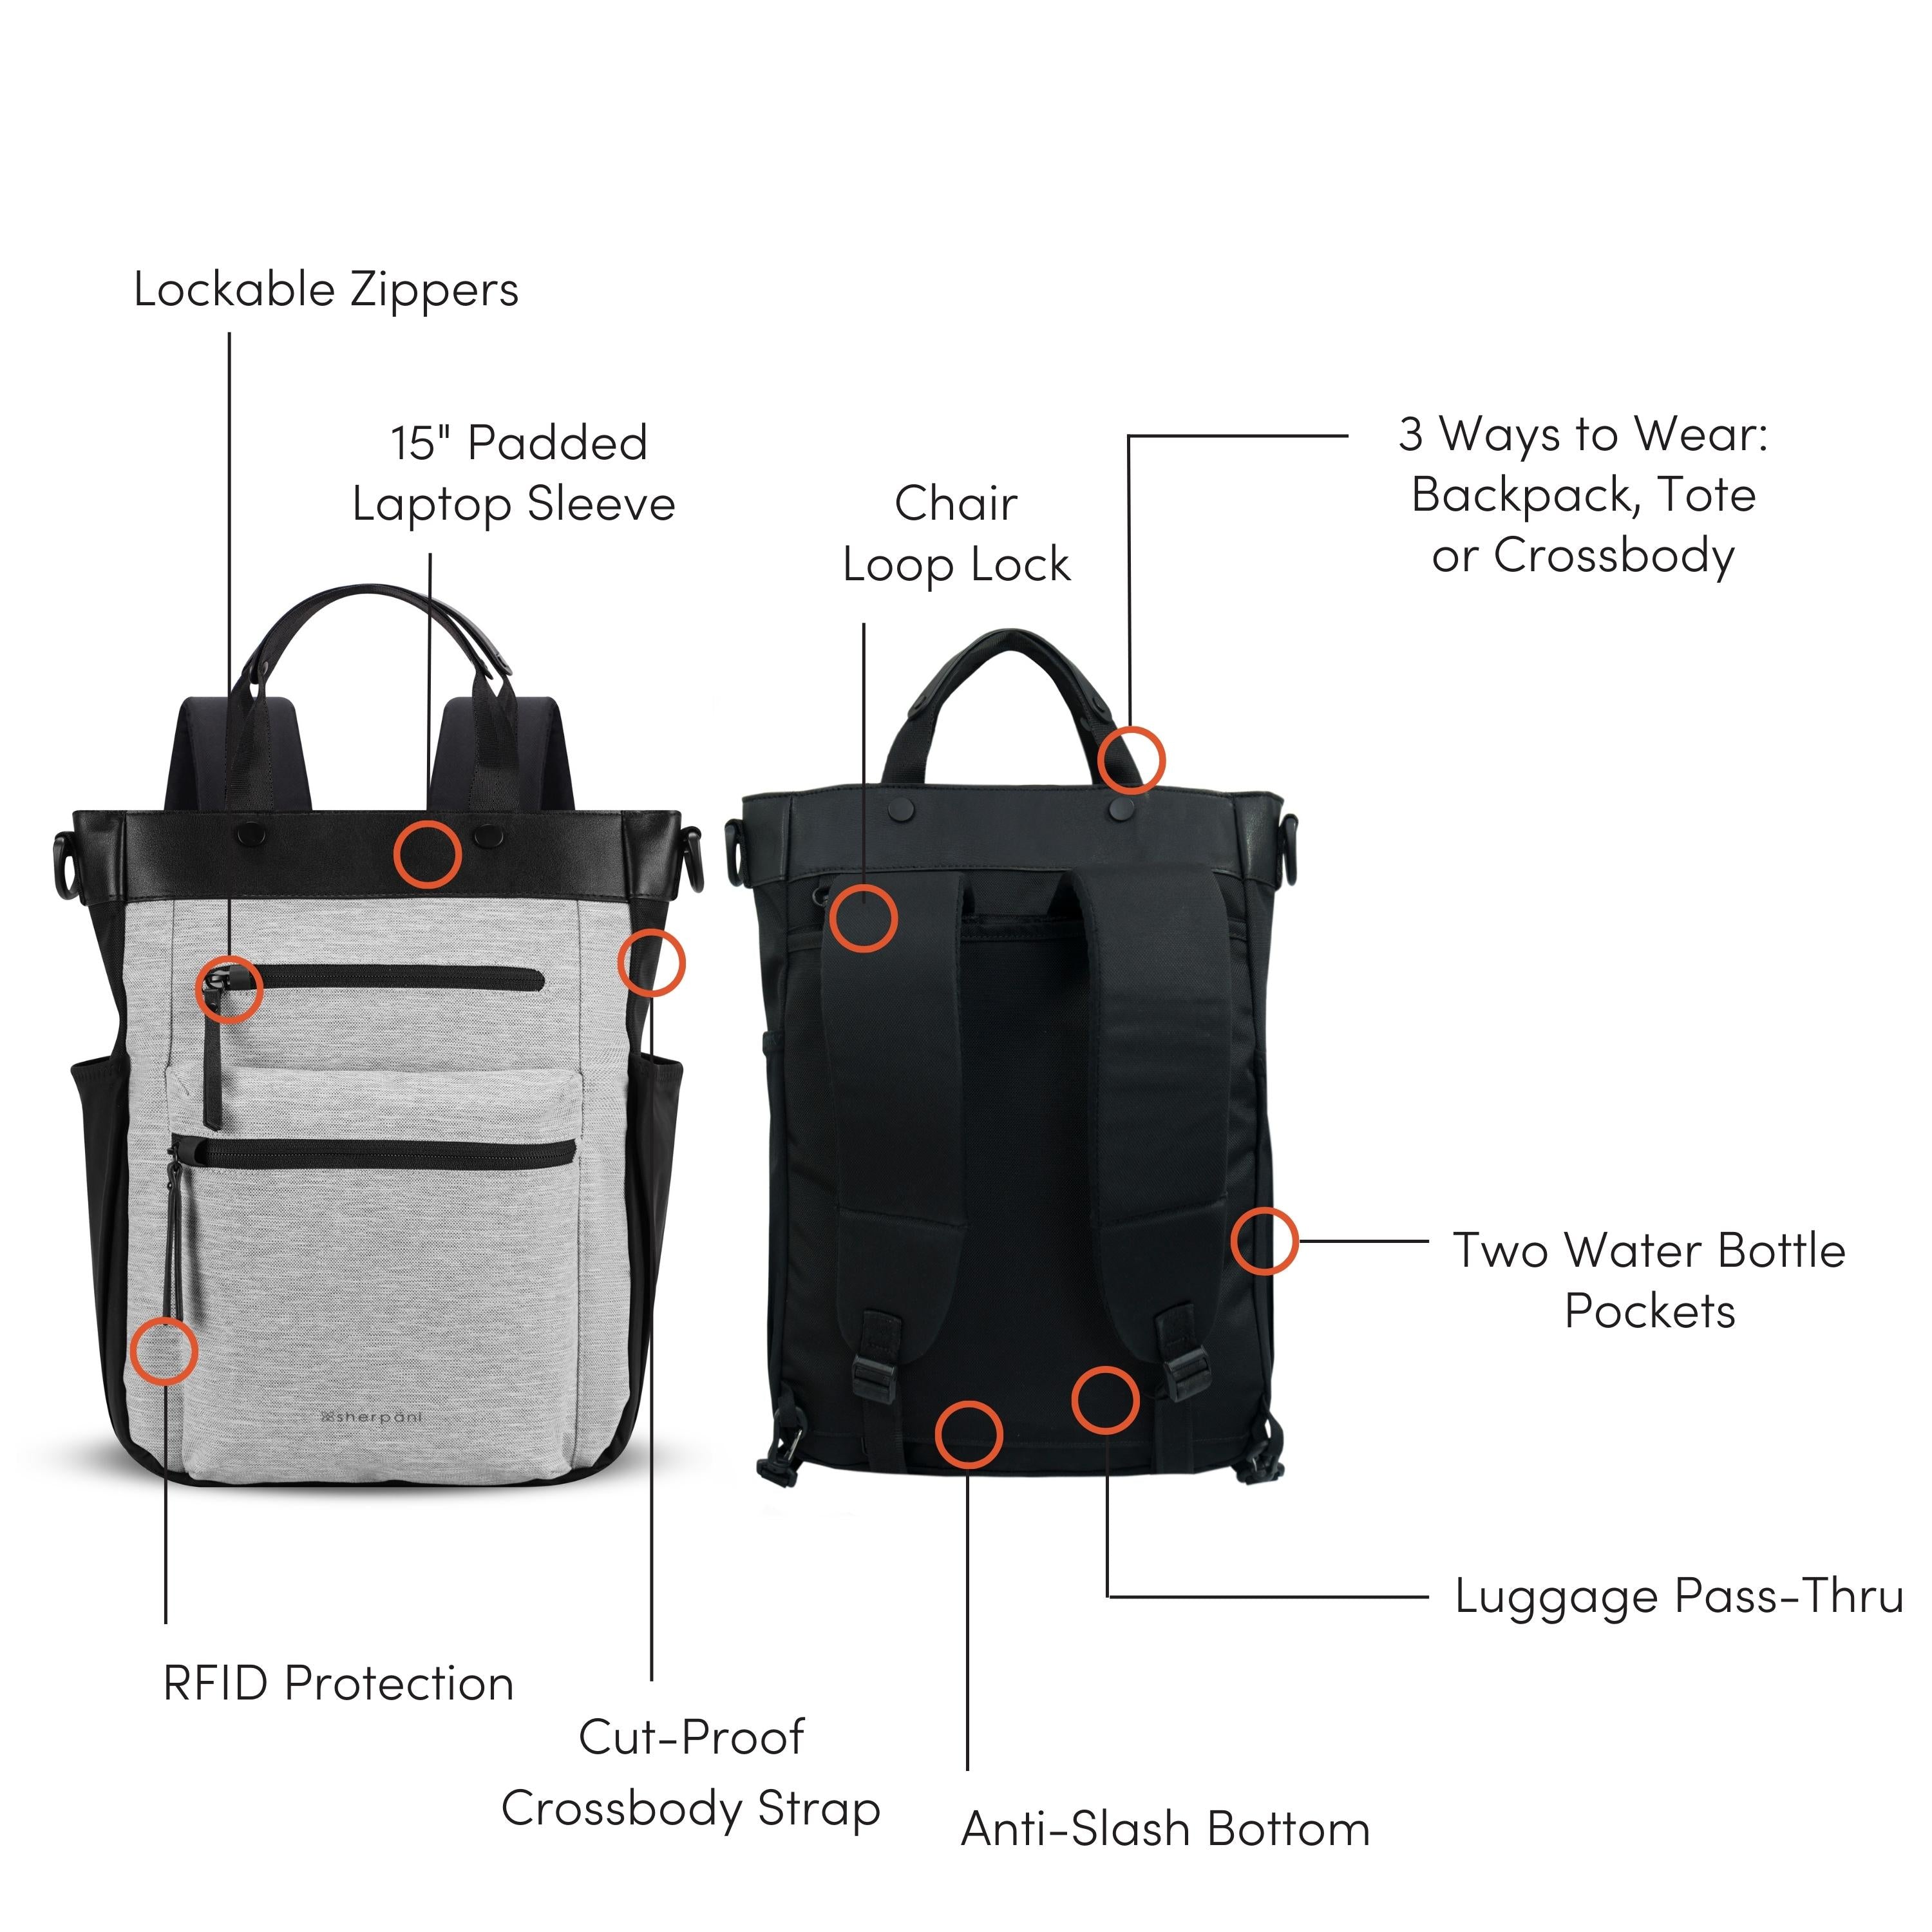 Graphic showcasing the features of Sherpani’s Anti Theft bag, the Soleil AT in Sterling. There is a front and a back view of the bag, red circles highlight the following features: Lockable Zippers, 15” Padded Laptop Sleeve, Chair Loop Lock, 3 Ways to Wear: Backpack, Tote or Crossbody, Two Water Bottle Pockets, Luggage Pass-Thru, Anti-Slash Bottom, Cut-Proof Crossbody Strap, RFID Protection. 